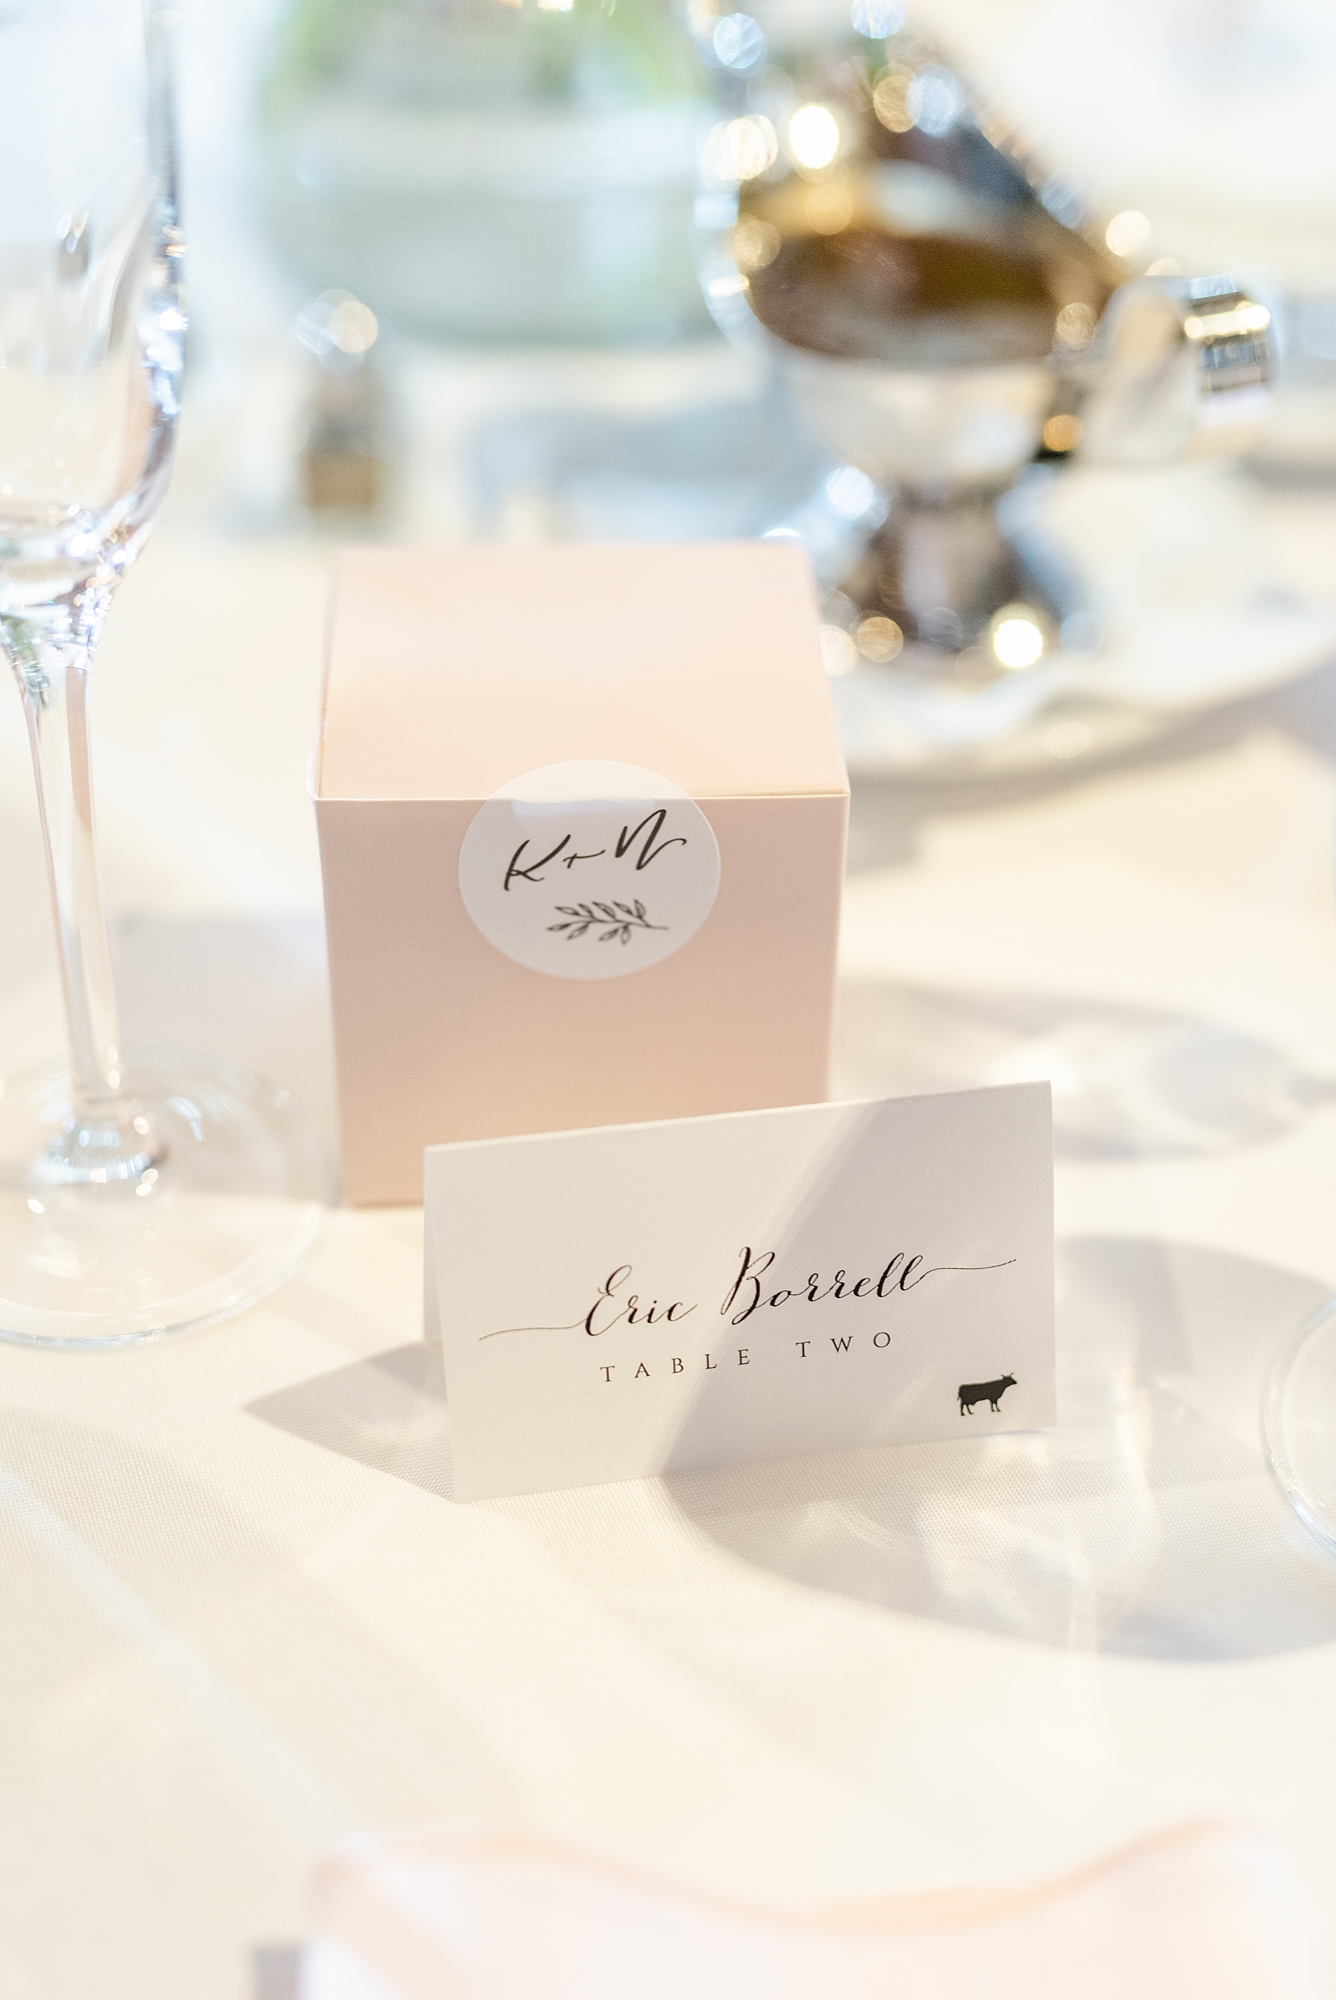 seating cards and gifts for Ohio wedding reception